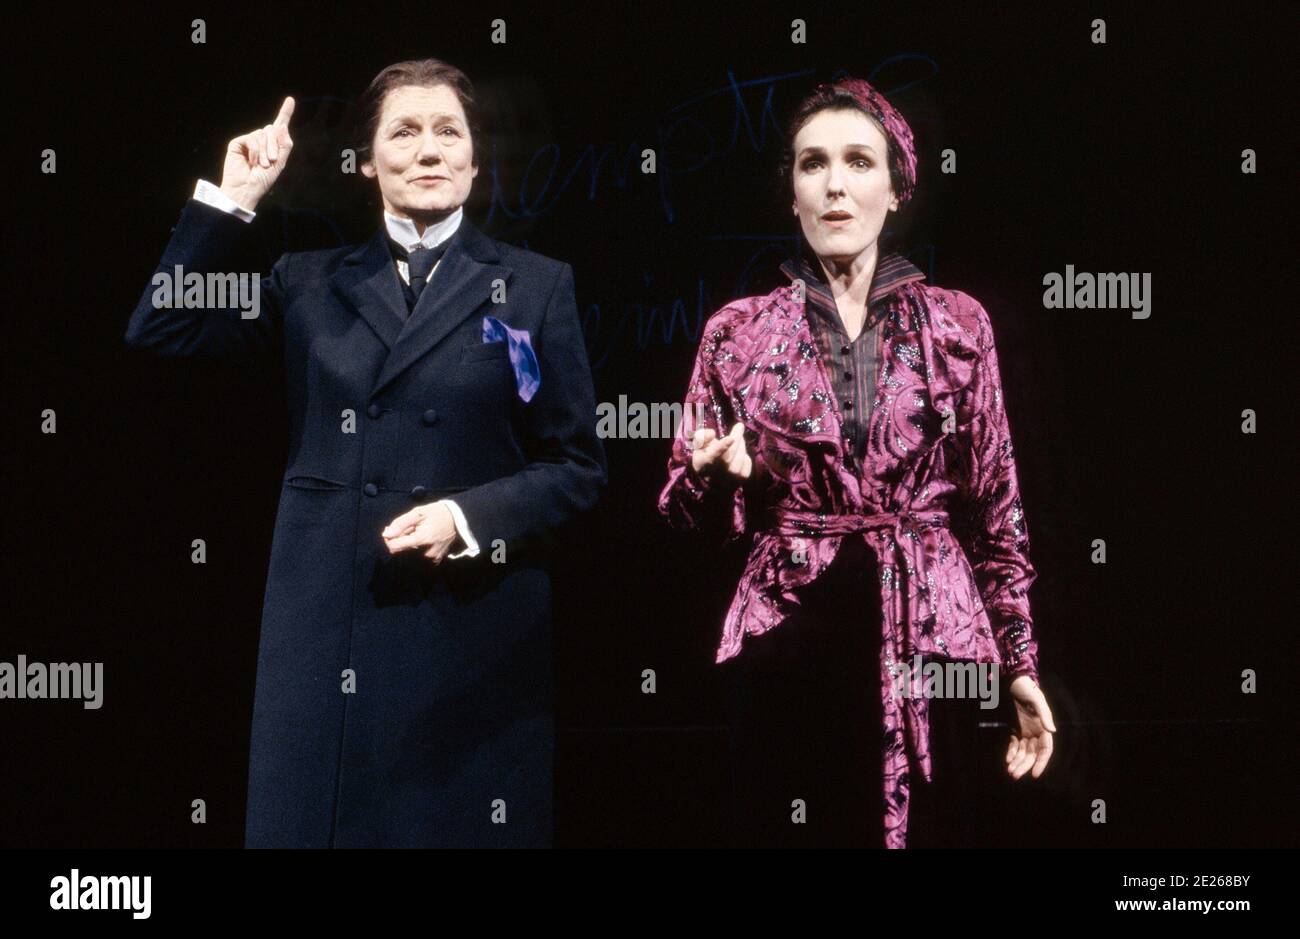 Gillian Barge (Sir William Crookes), Angela Tunstall (Lady Nellie Crookes) in SQUARE ROUNDS  by Tony Harrison at the Olivier Theatre, National Theatre (NT), London SE1  01/10/1992  music: Dominic Muldowney  design: Jocelyn Herbert  costume transformations: Arturo Brachetti  lighting: Mick Hughes  magic consultant: Ali Bongo  choreographer: Lawrence Evans  director: Tony Harrison Stock Photo